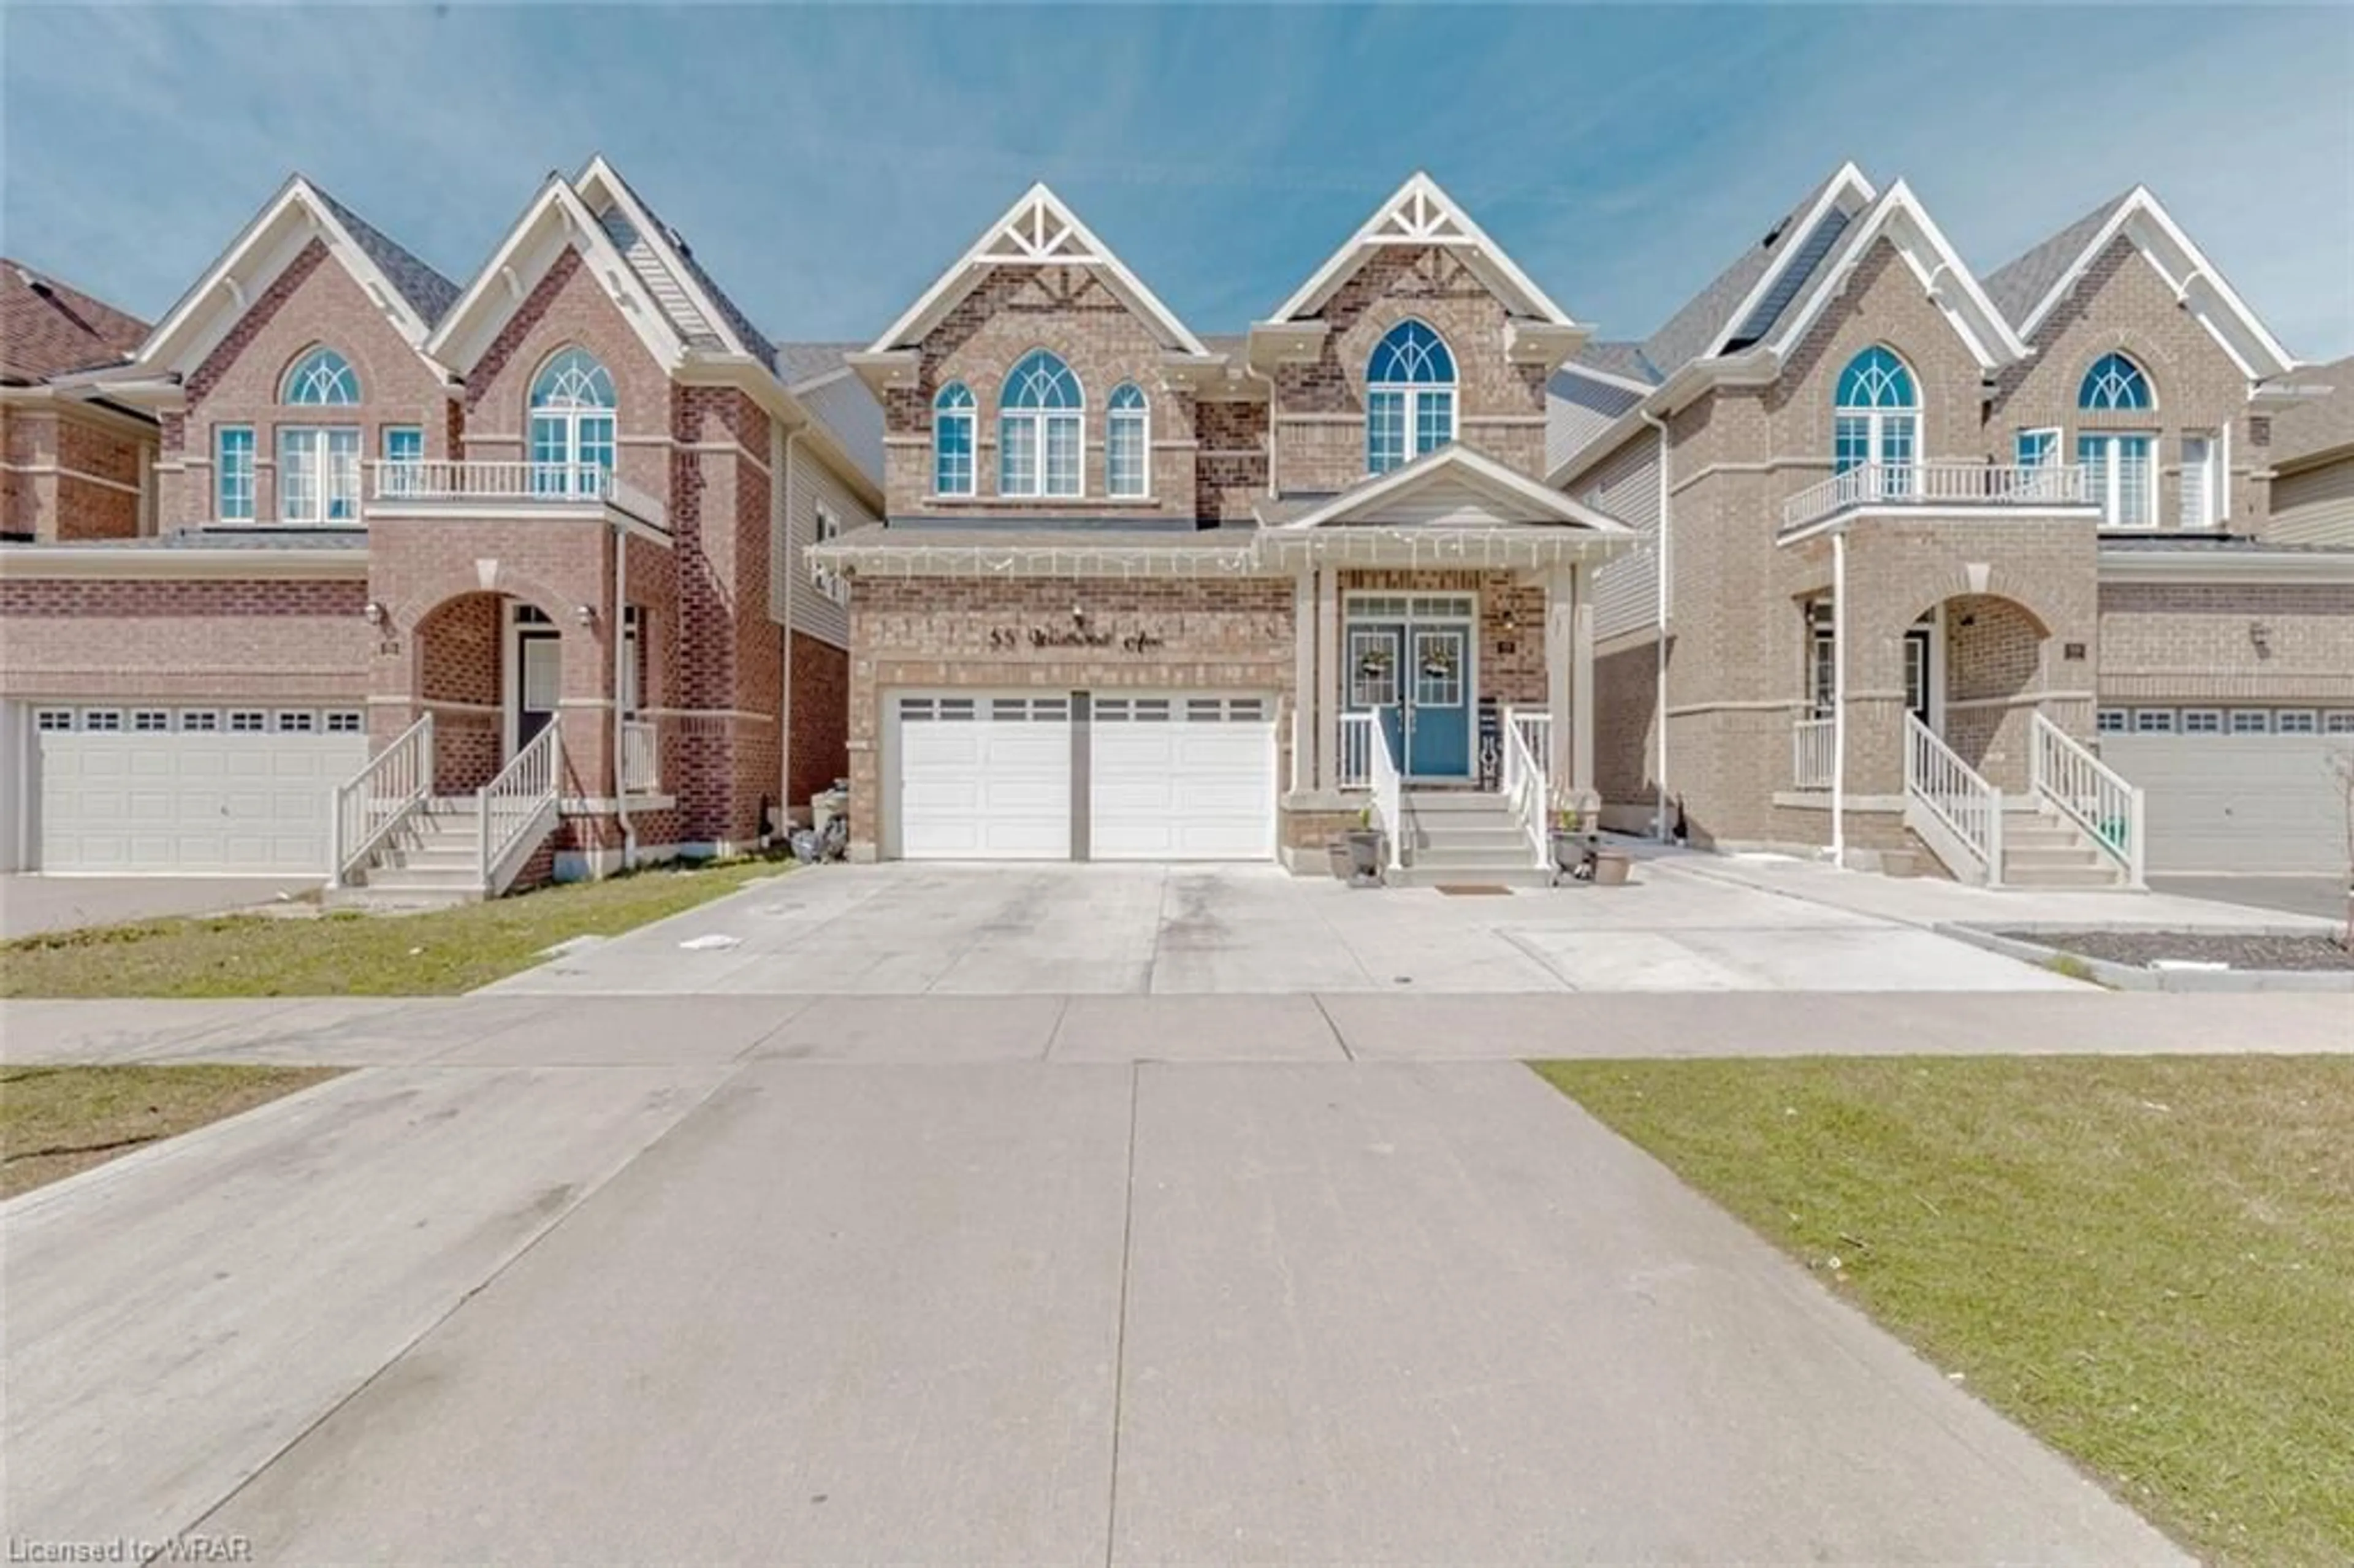 Home with brick exterior material for 55 Weatherall Ave, Cambridge Ontario N3H 0C1